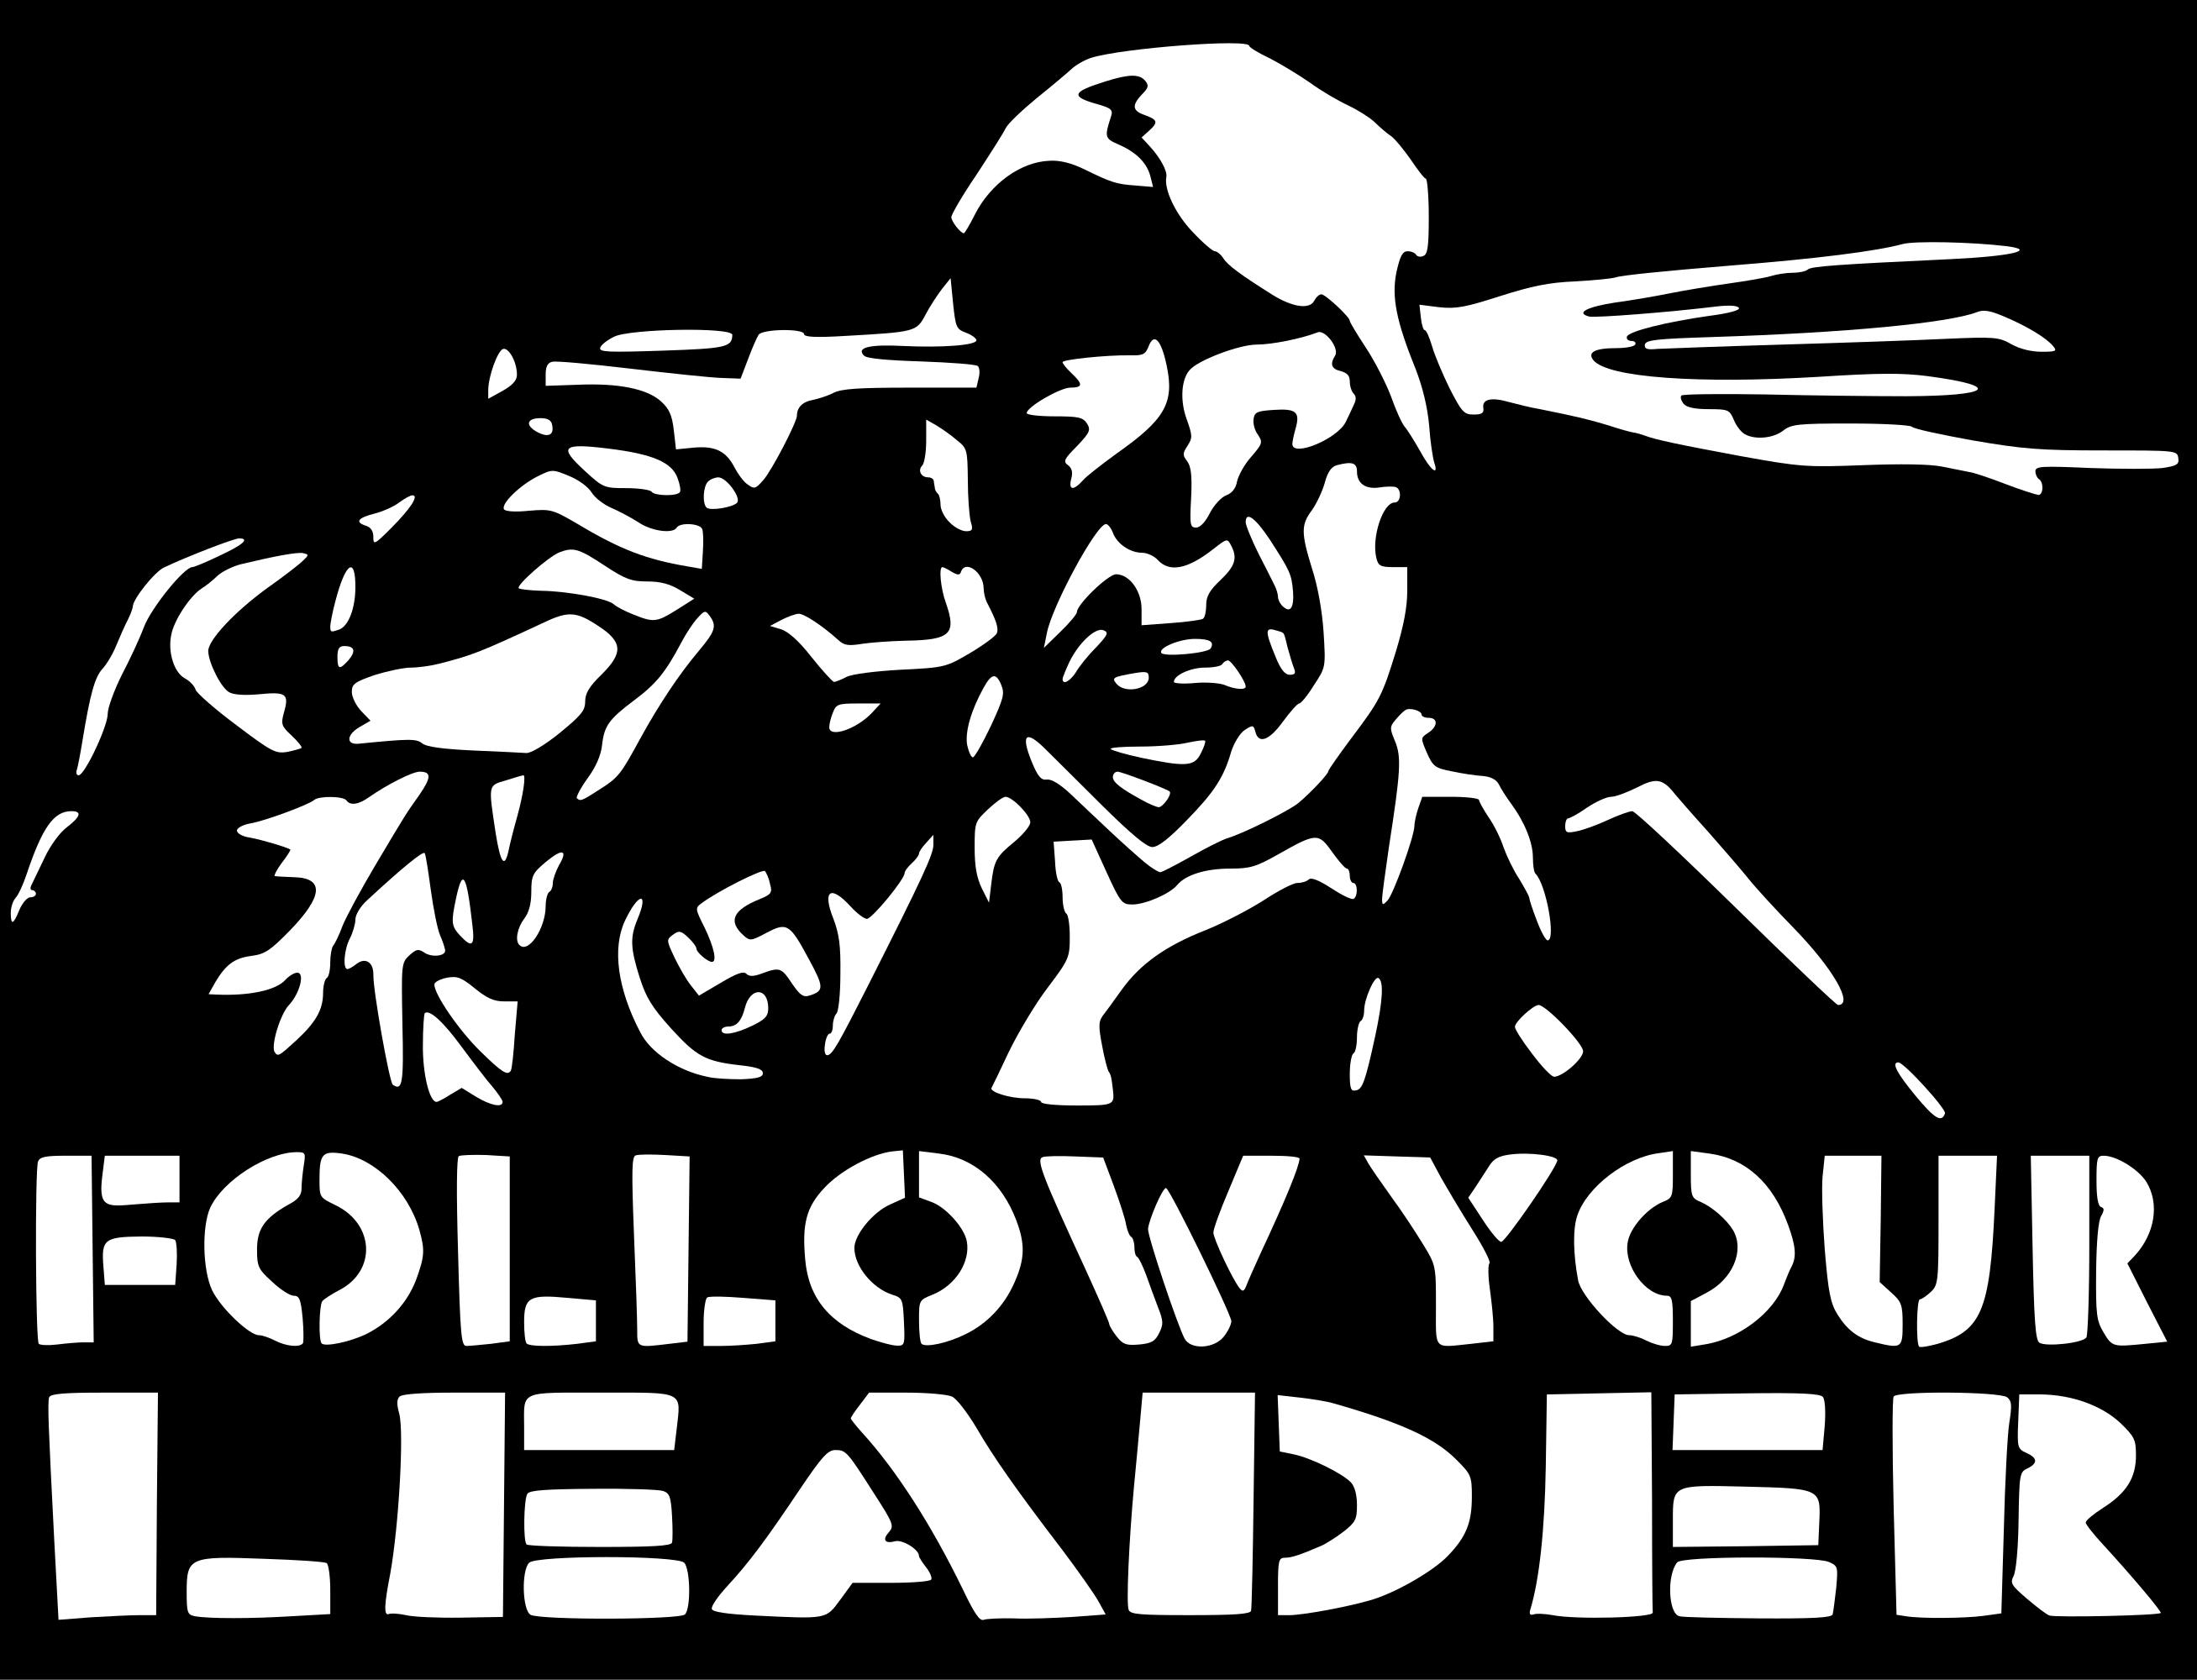 Follow your leader